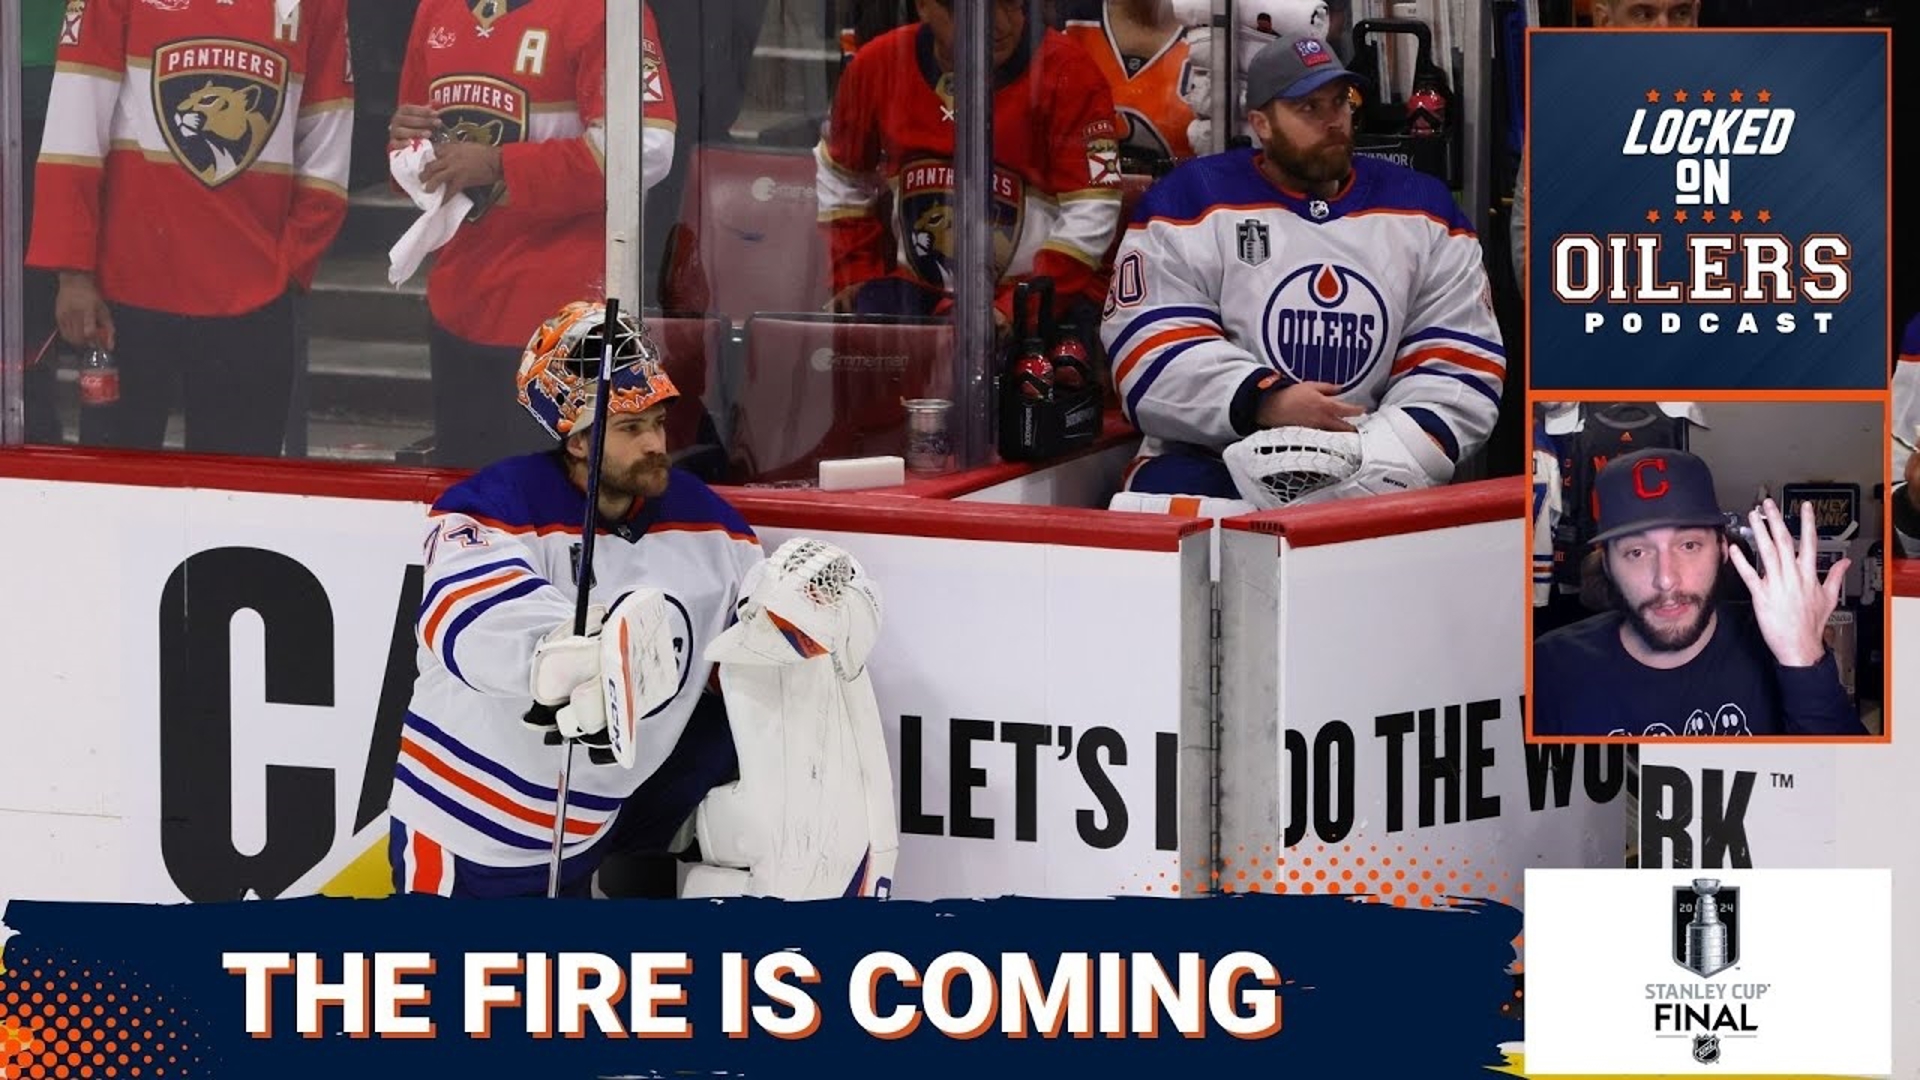 Join host Nick Zararis as he breaks down the Edmonton Oilers' tough start in the Stanley Cup Final, falling behind 2-0 against the Florida Panthers.